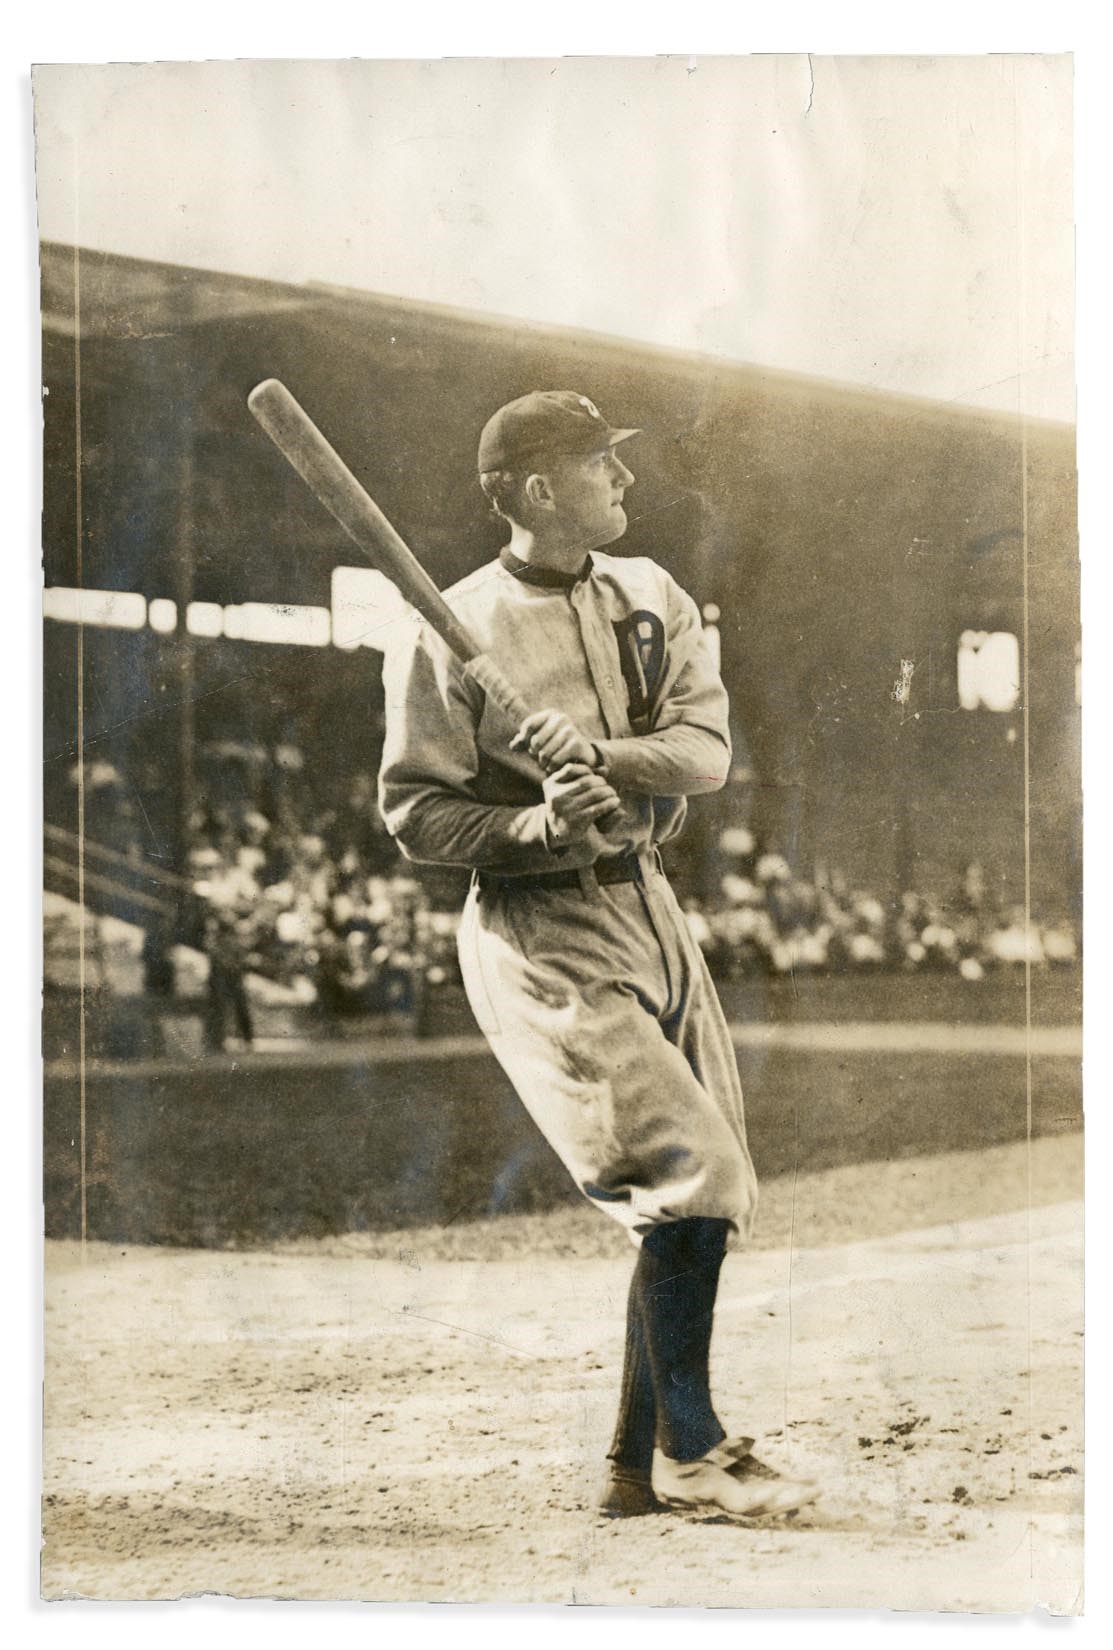 Ty Cobb and Detroit Tigers - Definitive 1910s Ty Cobb Photograph